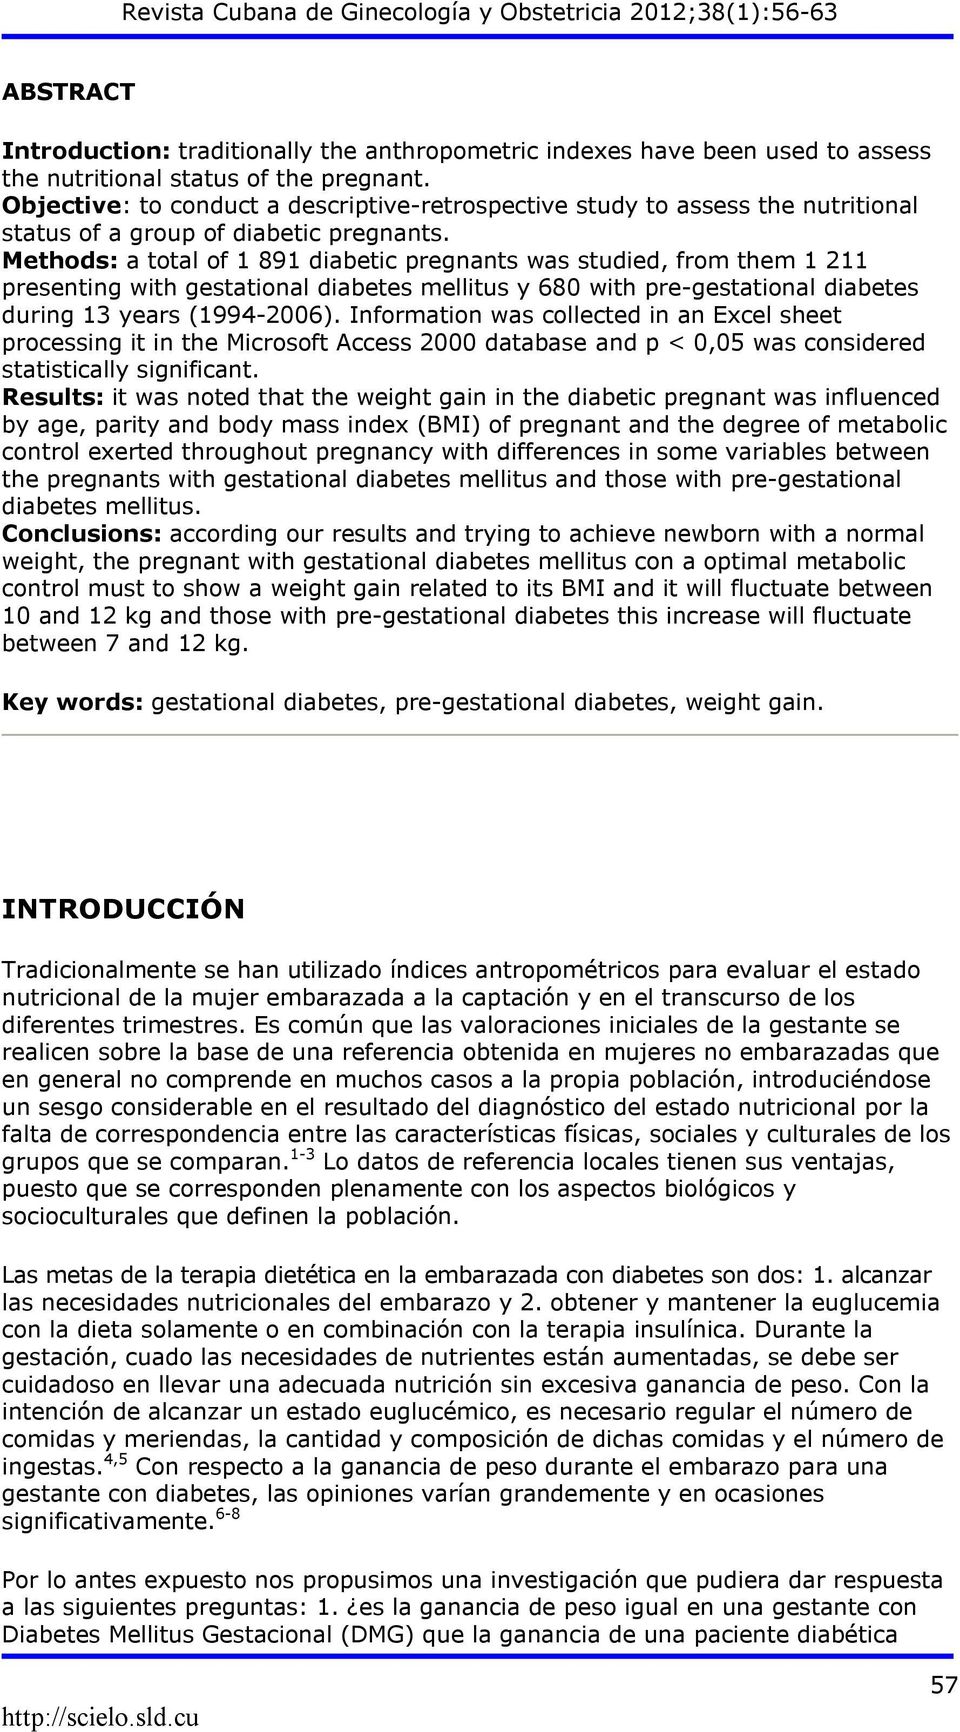 Methods: a total of 1 891 diabetic pregnants was studied, from them 1 211 presenting with gestational diabetes mellitus y 680 with pre-gestational diabetes during 13 years (1994-2006).